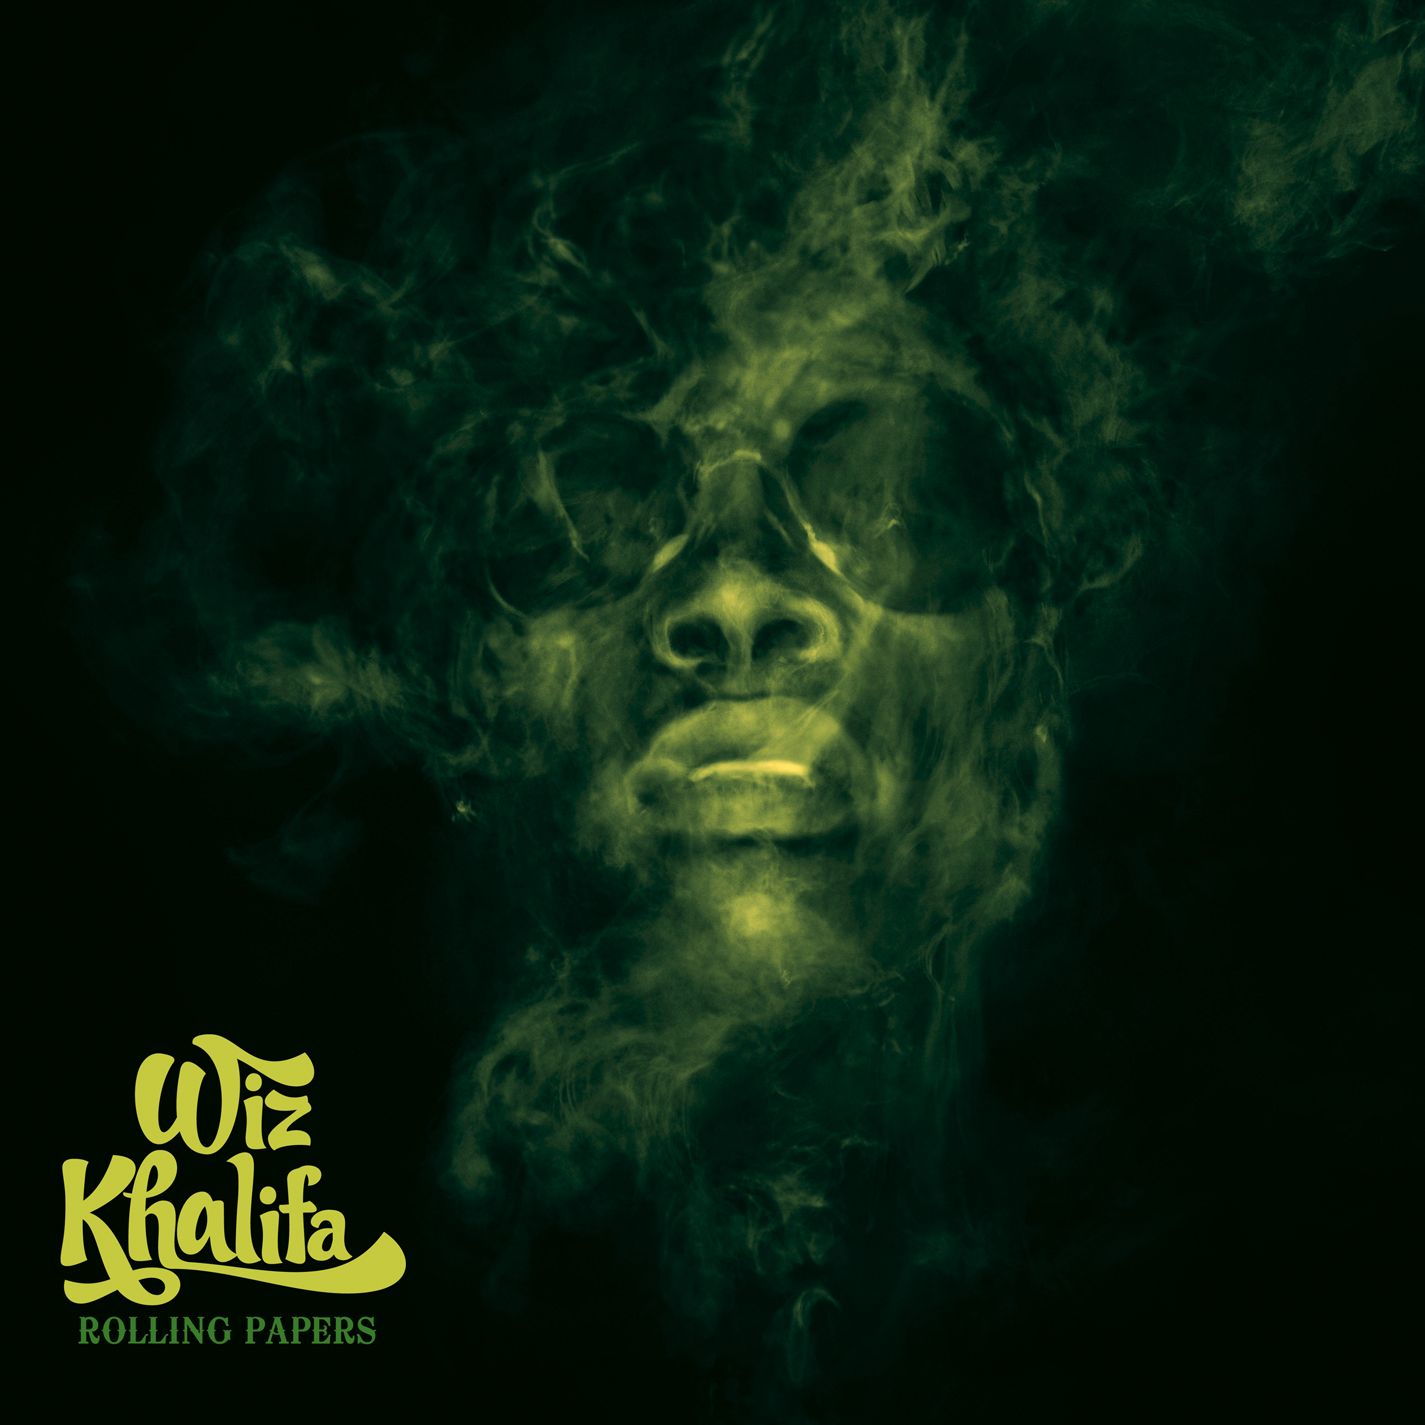 Wiz Khalifa Albums Covers Wallpapers